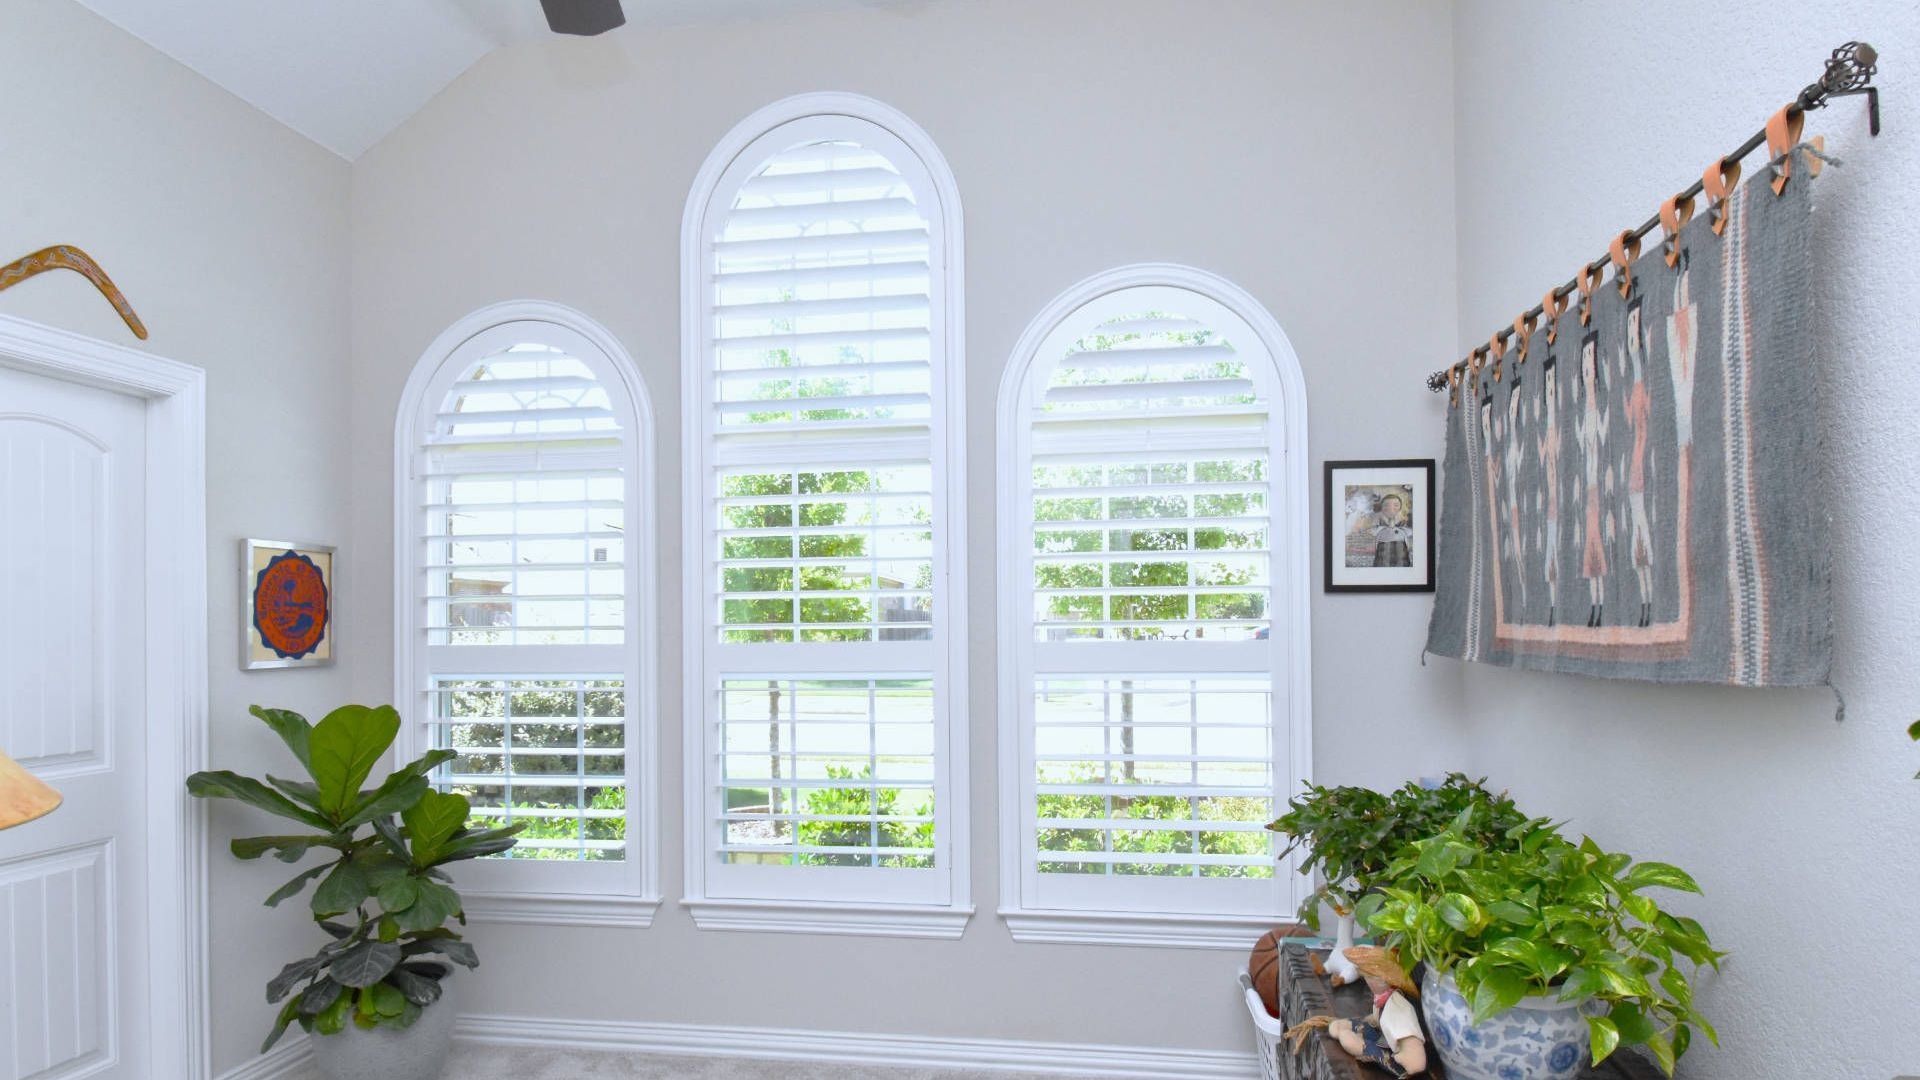 Airy Round Rock Home With Hidden Tilt Plantation Shutters Covering Arched Windows